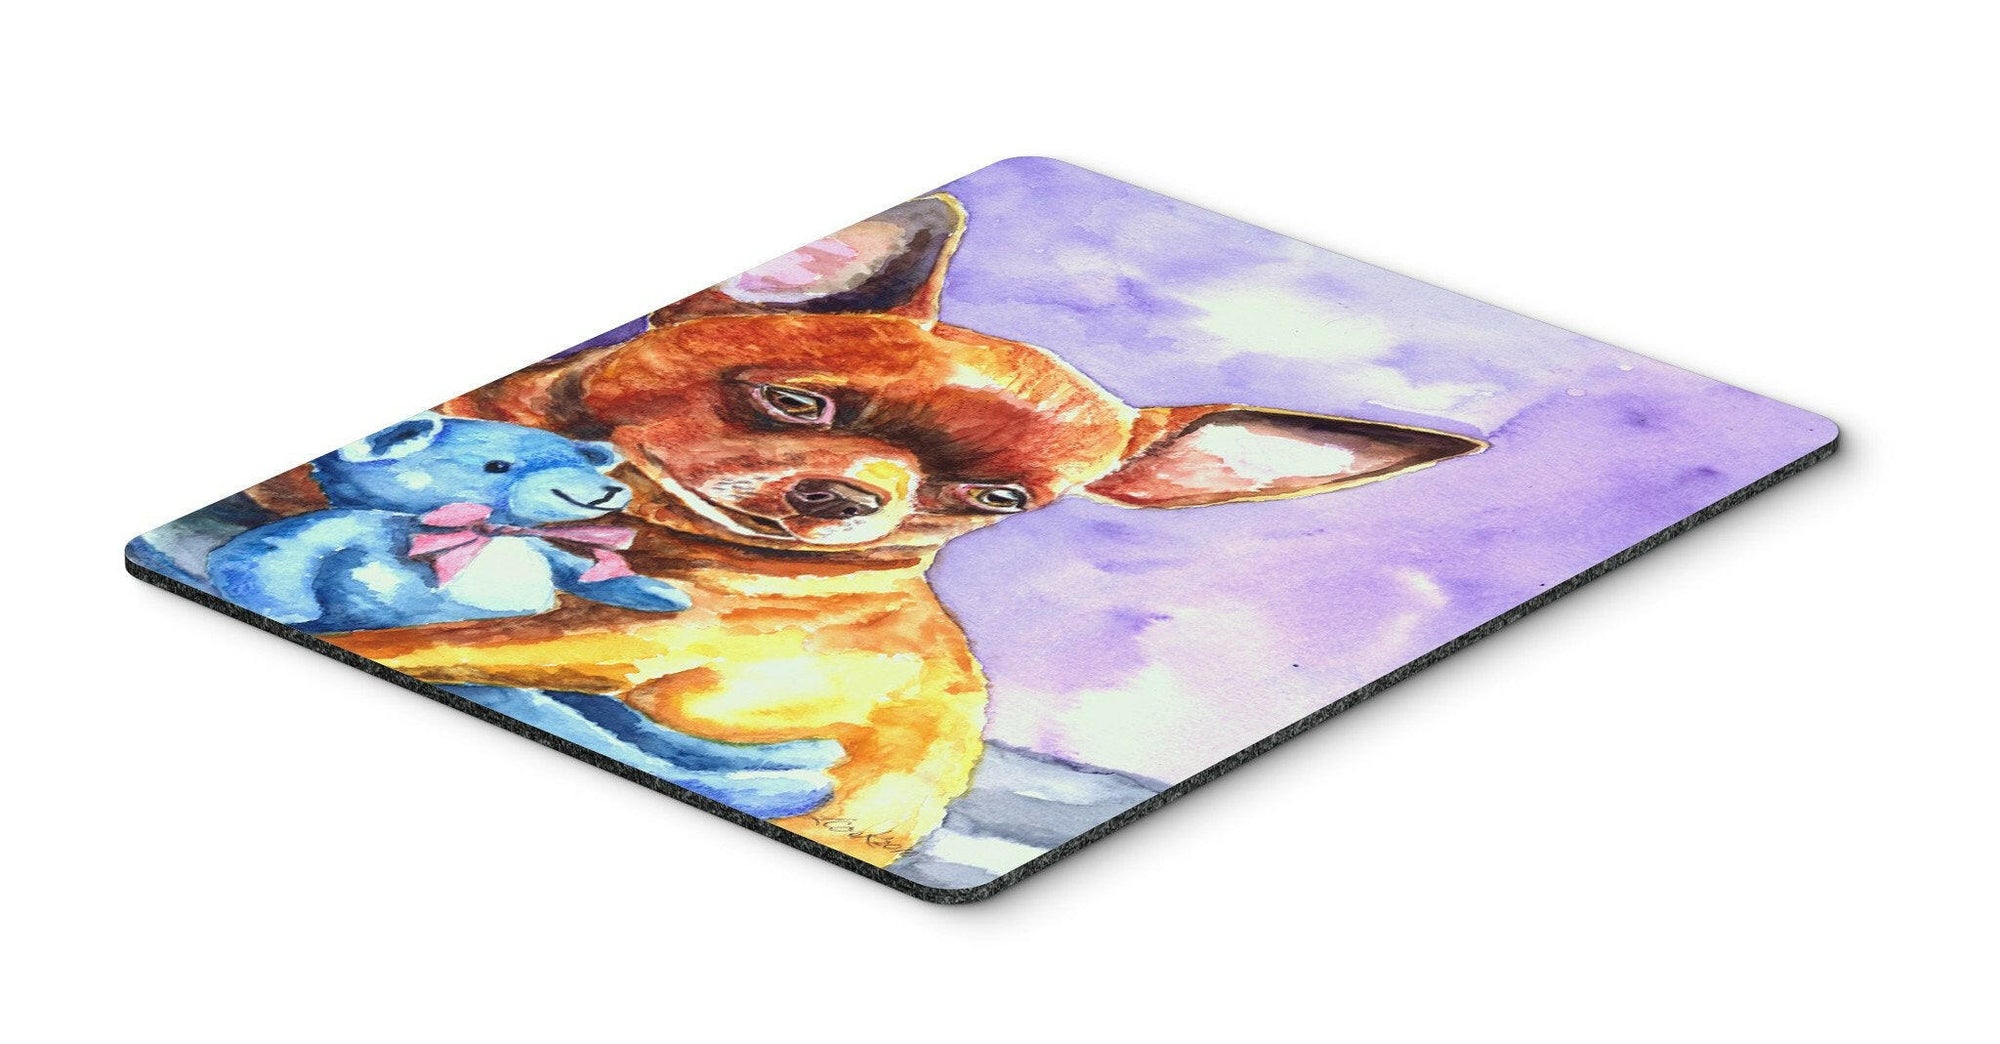 Chihuahua with Teddy Bear Mouse Pad, Hot Pad or Trivet 7340MP by Caroline's Treasures